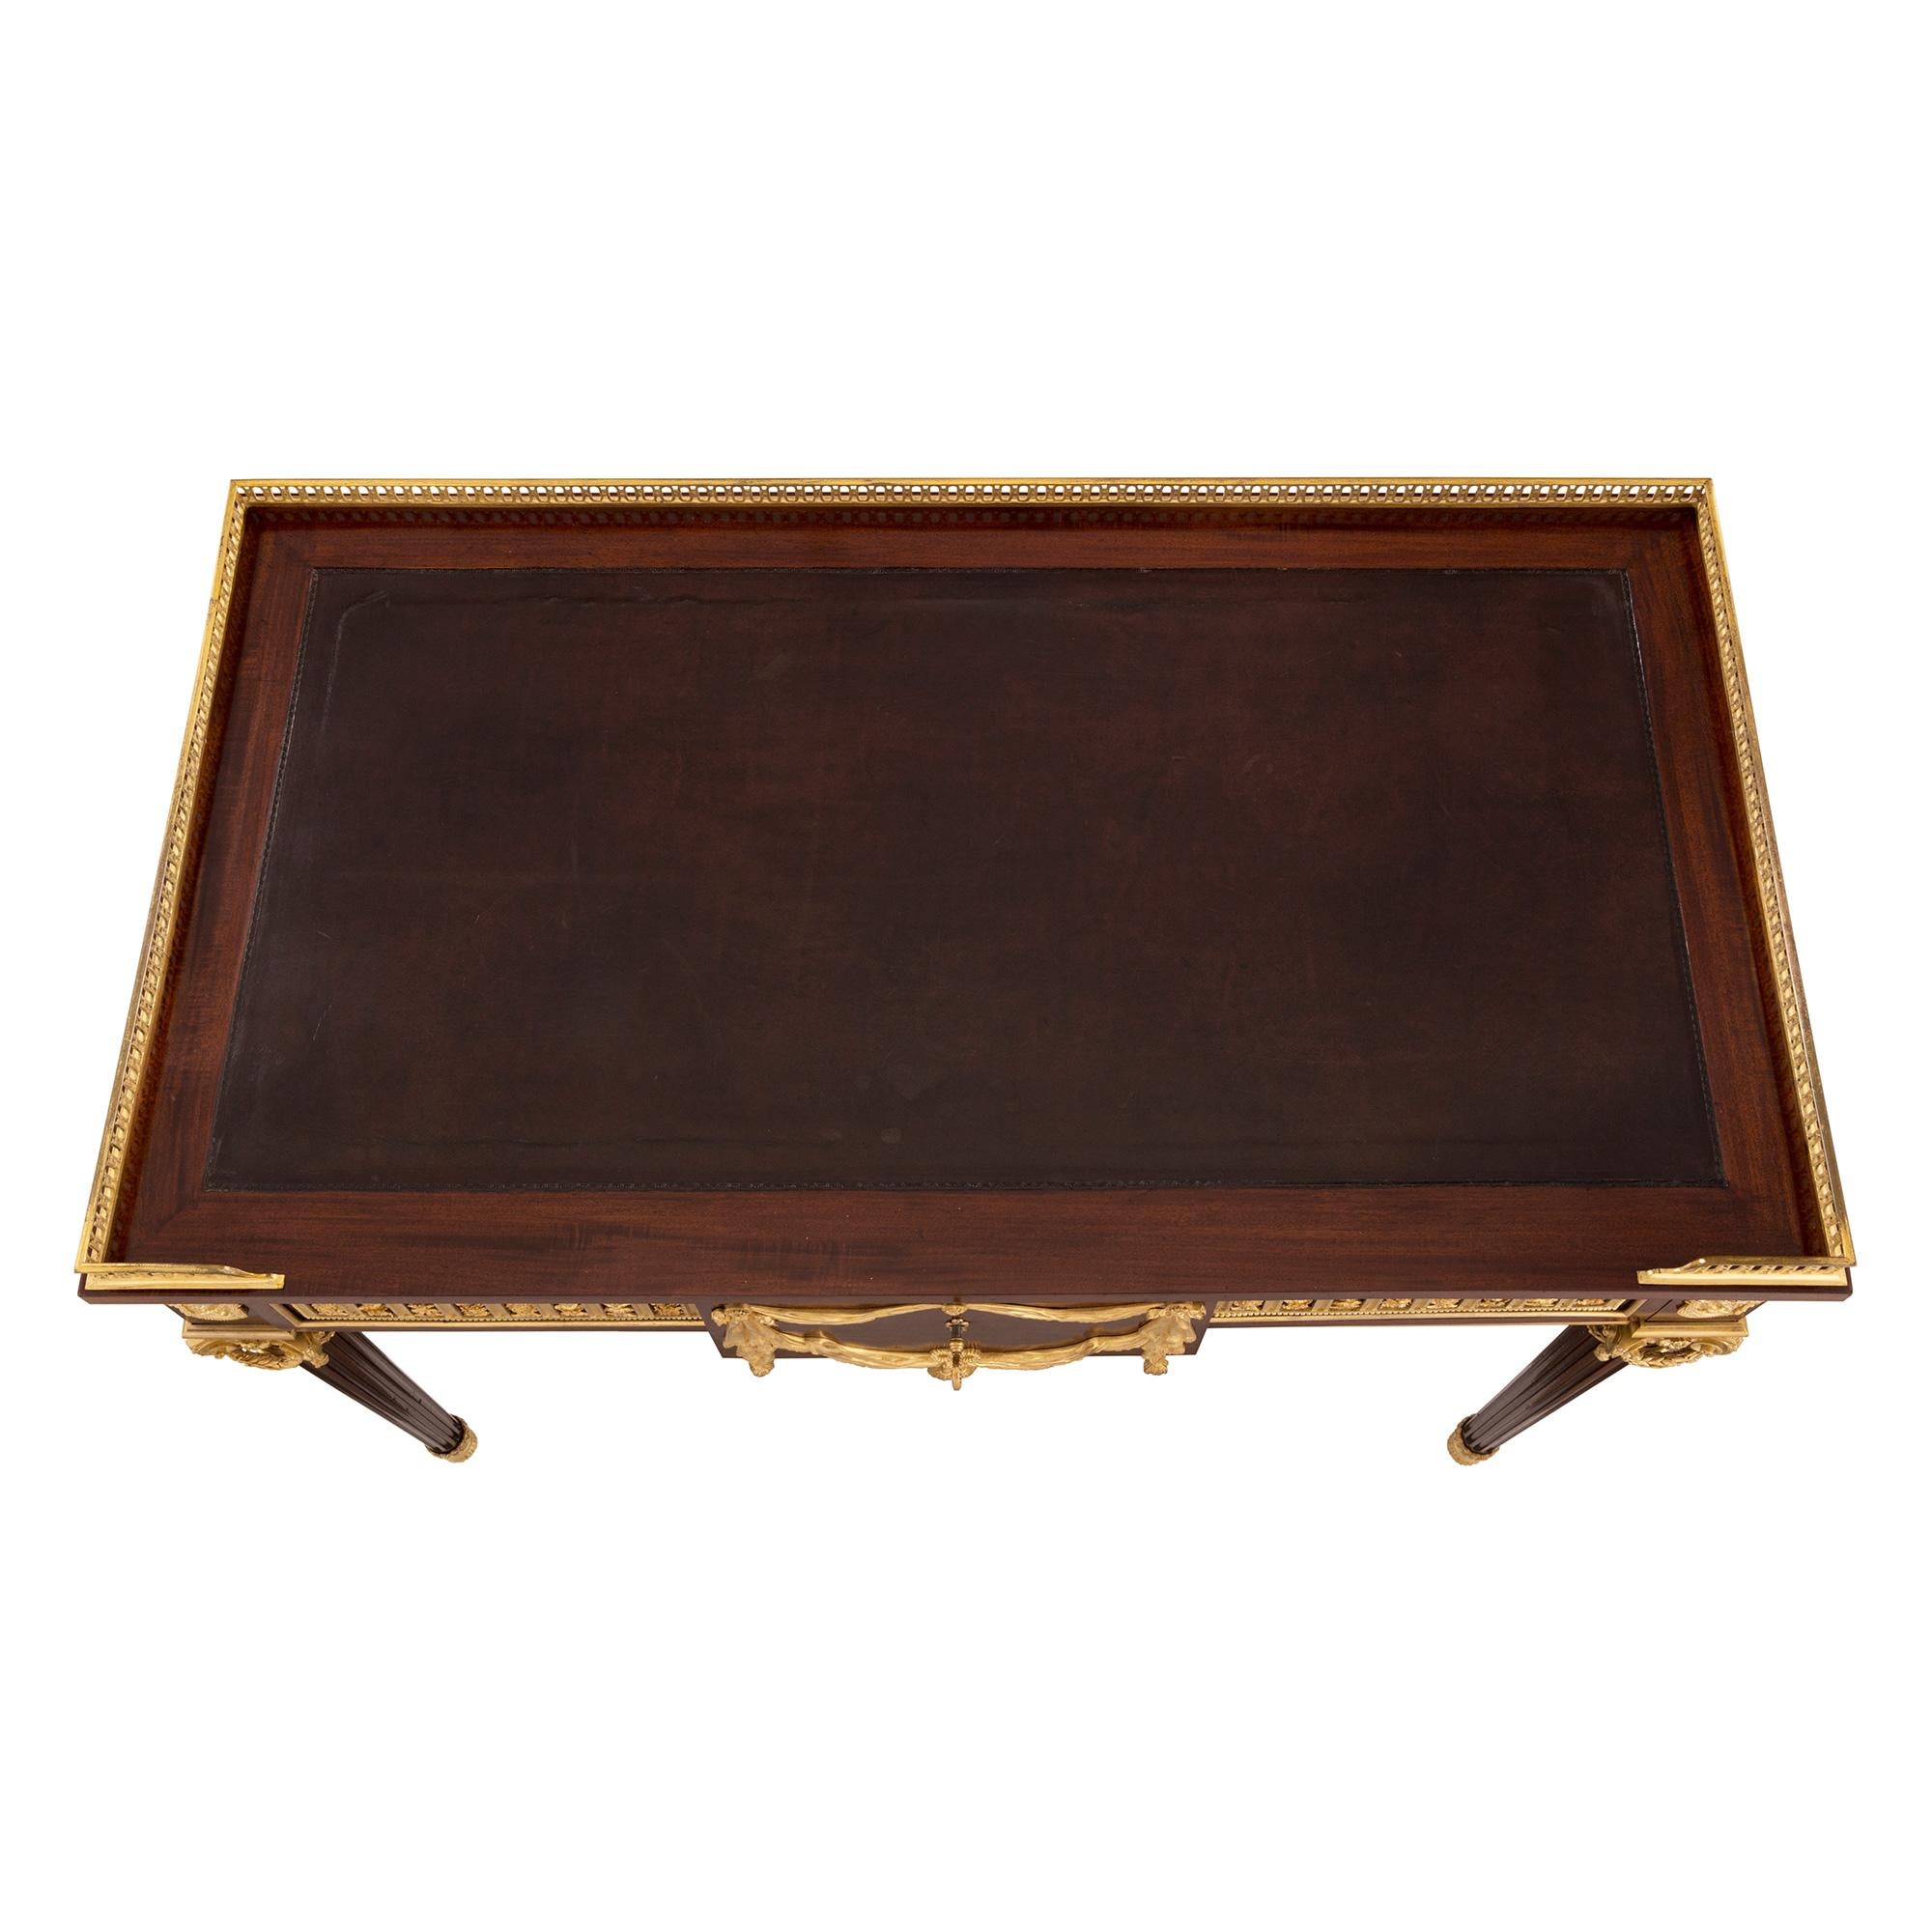 A stunning and extremely high quality French 19th century Louis XVI st. Belle Époque period mahogany, ormolu and leather desk, signed Henry Dasson 1877. The desk is raised by elegant circular tapered legs with beautiful fitted foliate sabots and